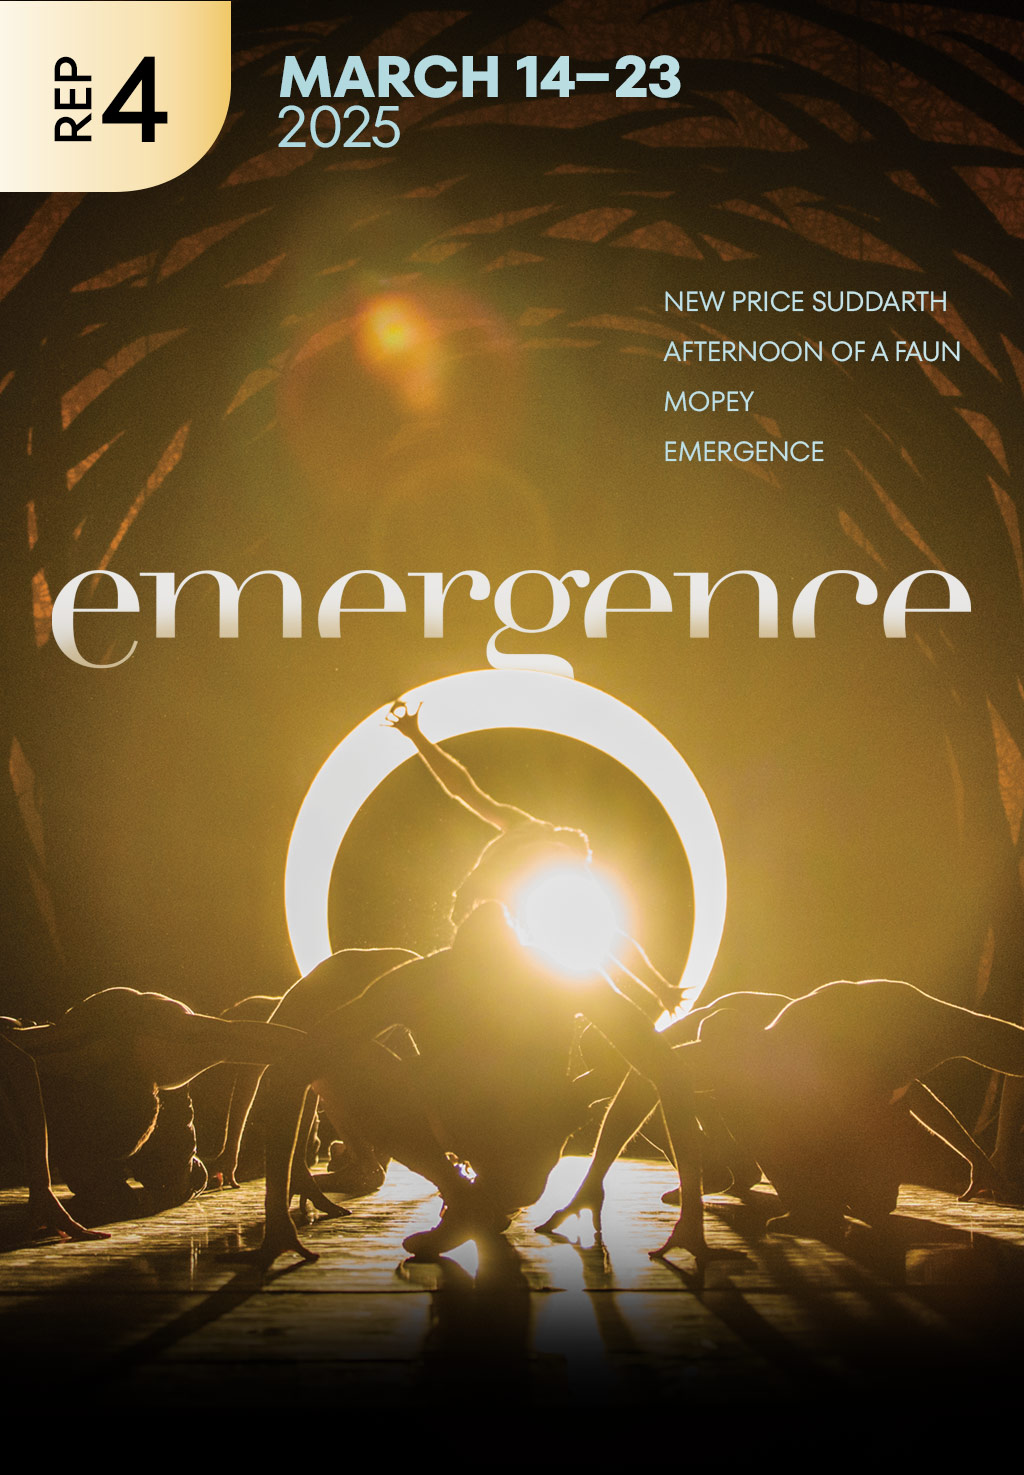 Rep 4: Emergence: March 14 - 23, 2025